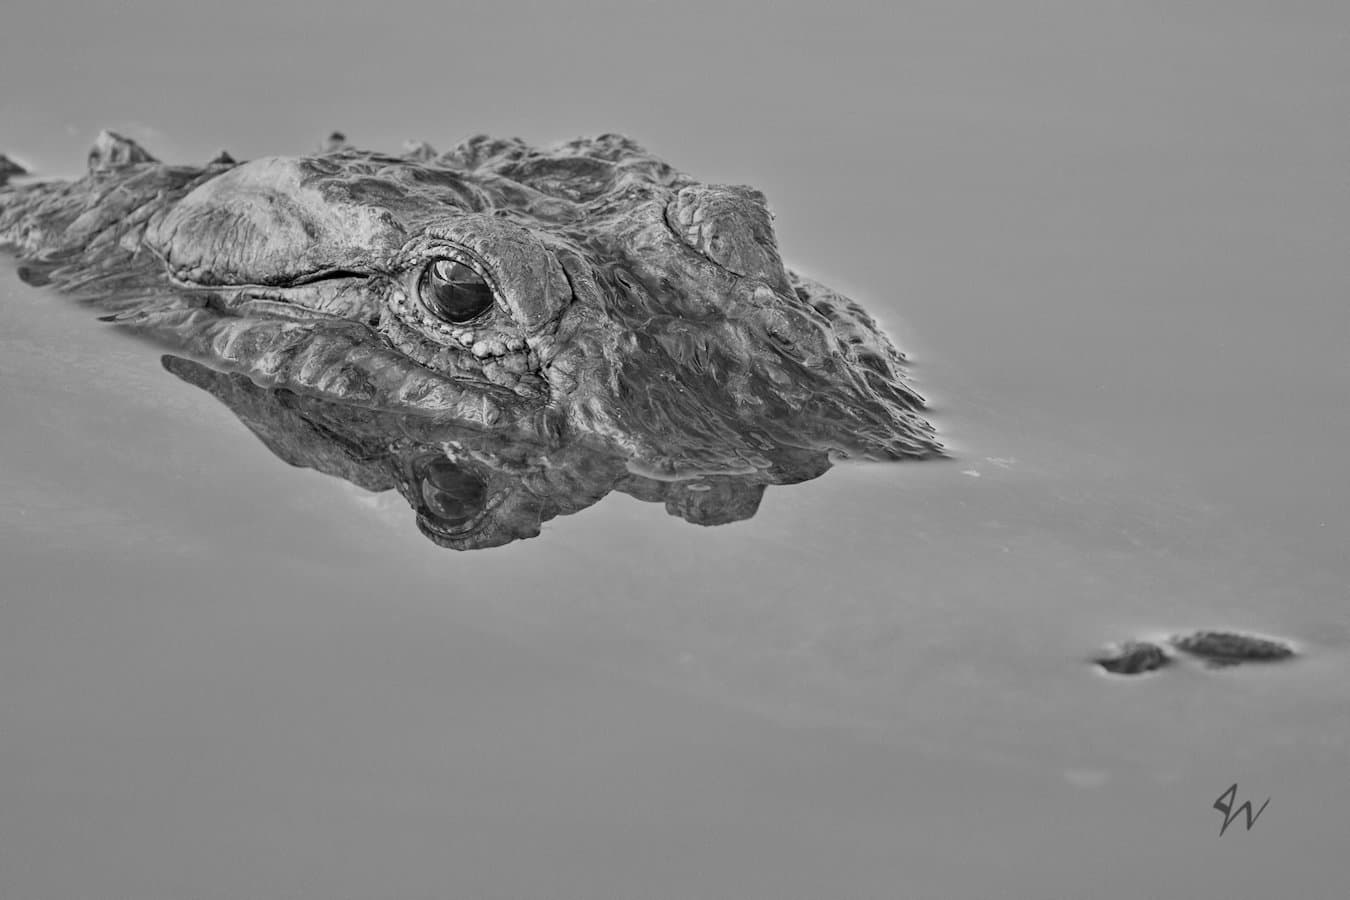 Gator full head half submerged staring up close at 45 degree angle in black and white.